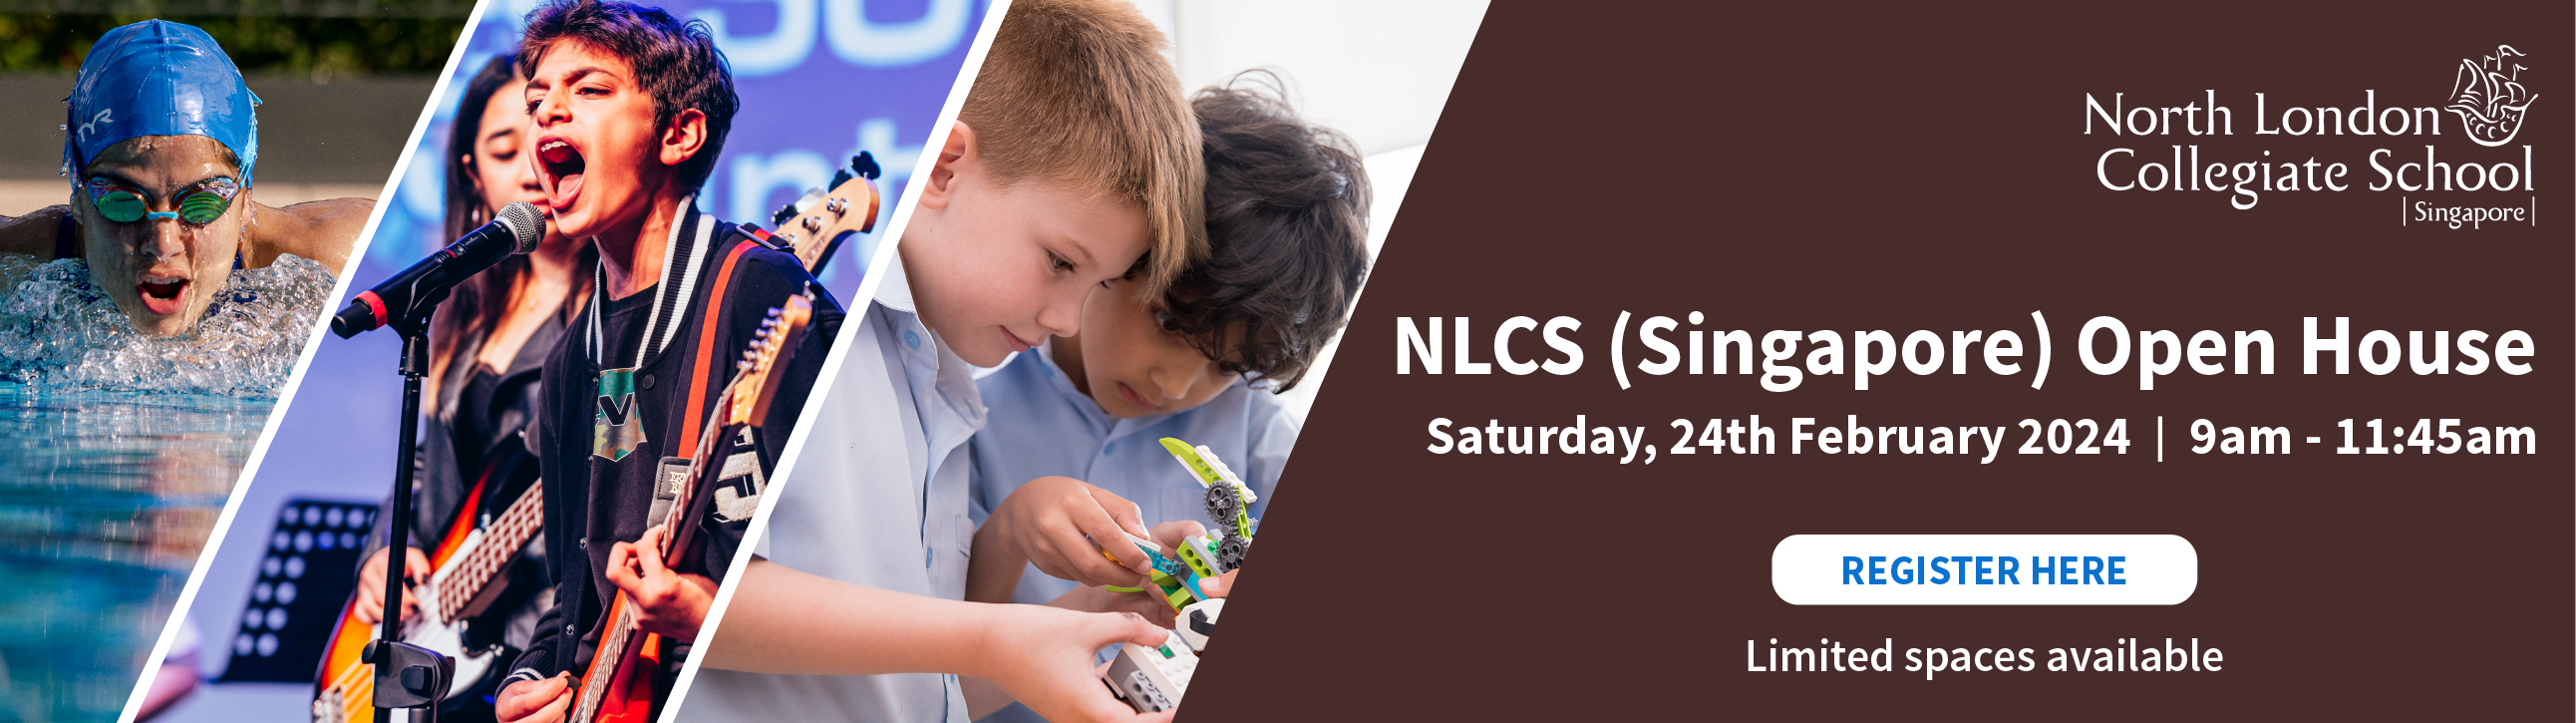 NLCS Open House 